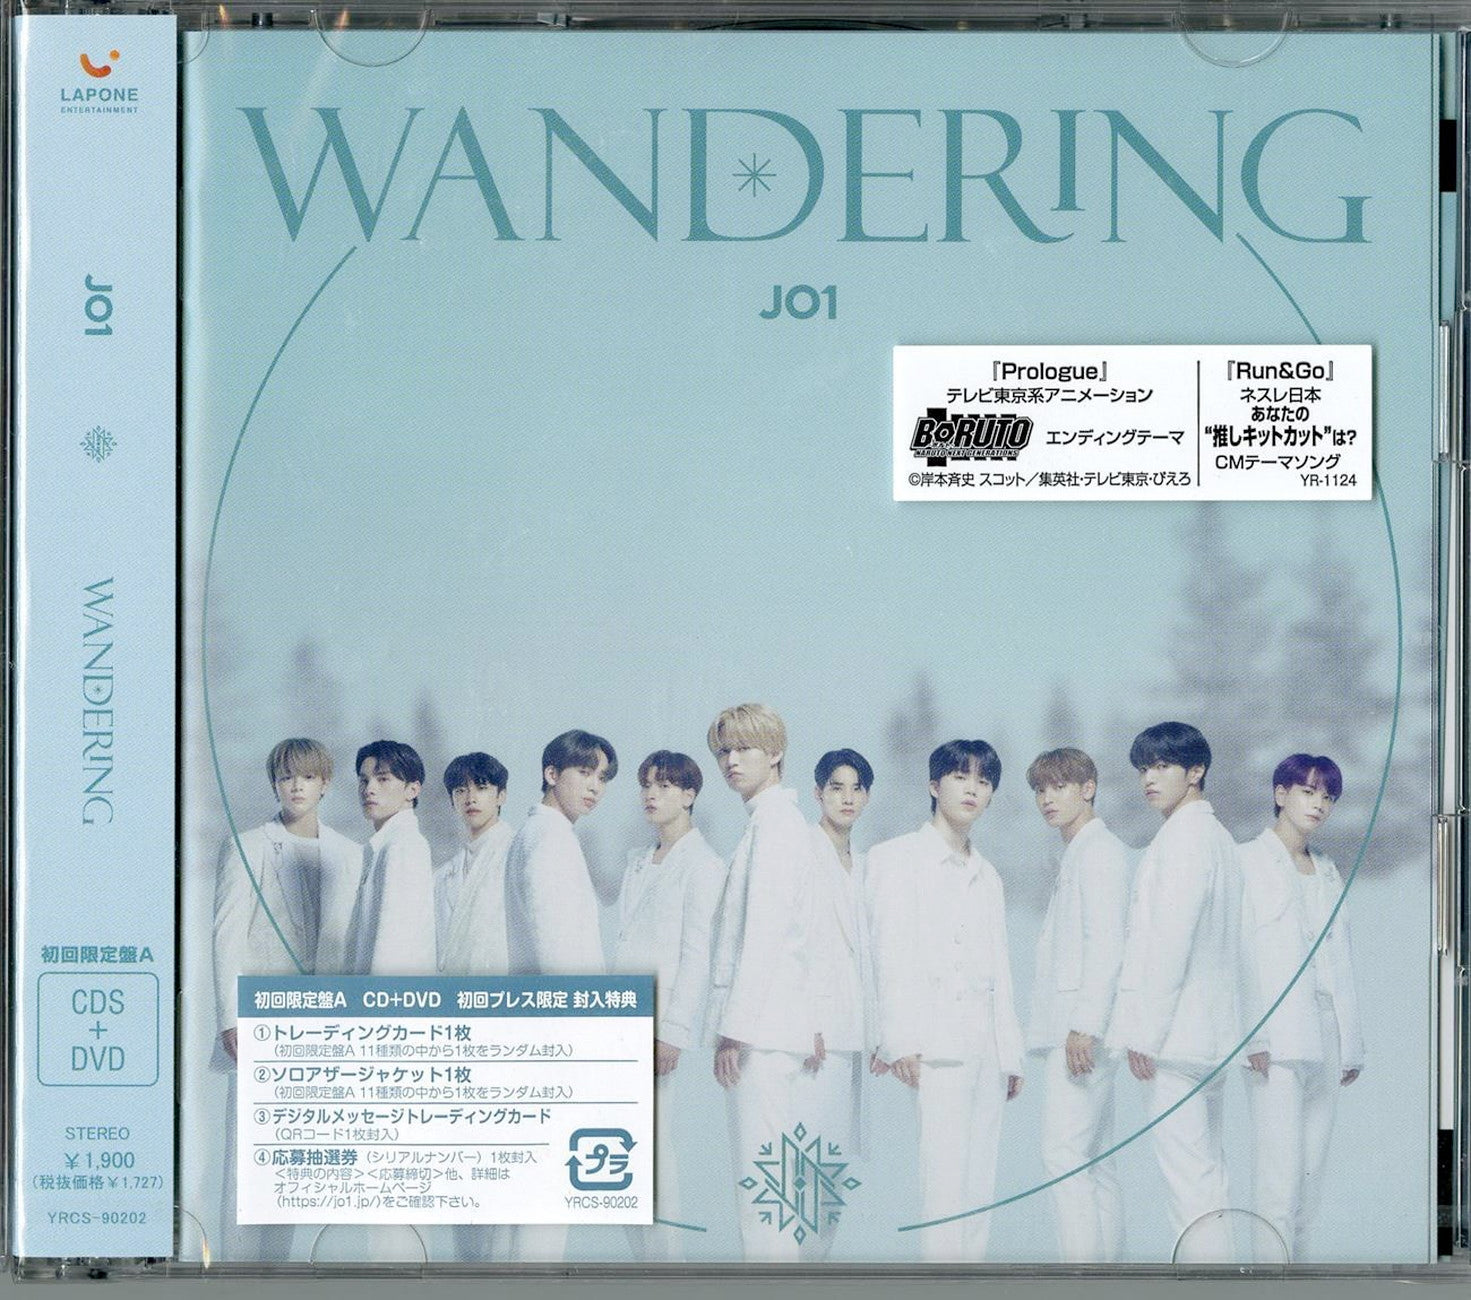 Jo1 - Wandering (Type-A) - Japan CD+DVD Limited Edition - CDs